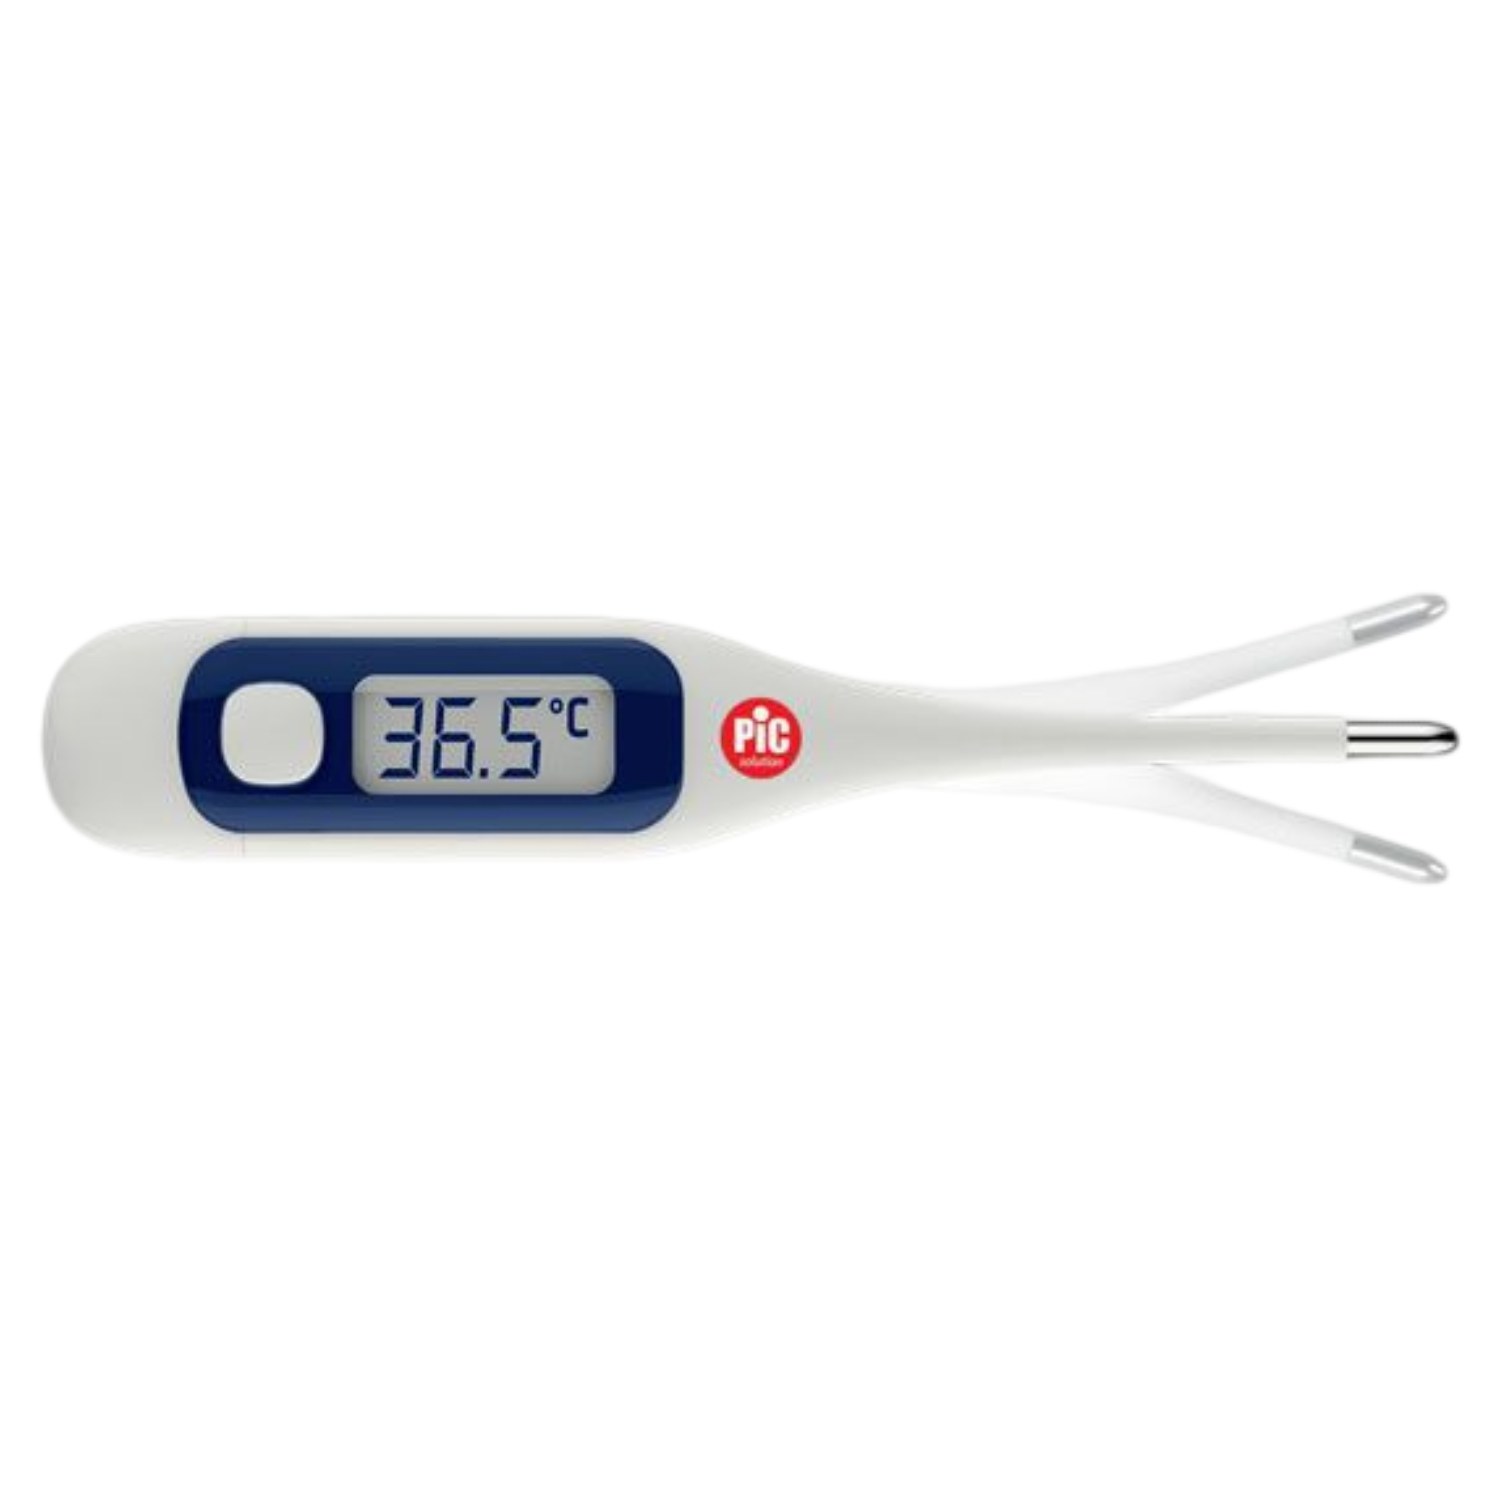 Product Image for PiC VedoClear Digital Thermometer